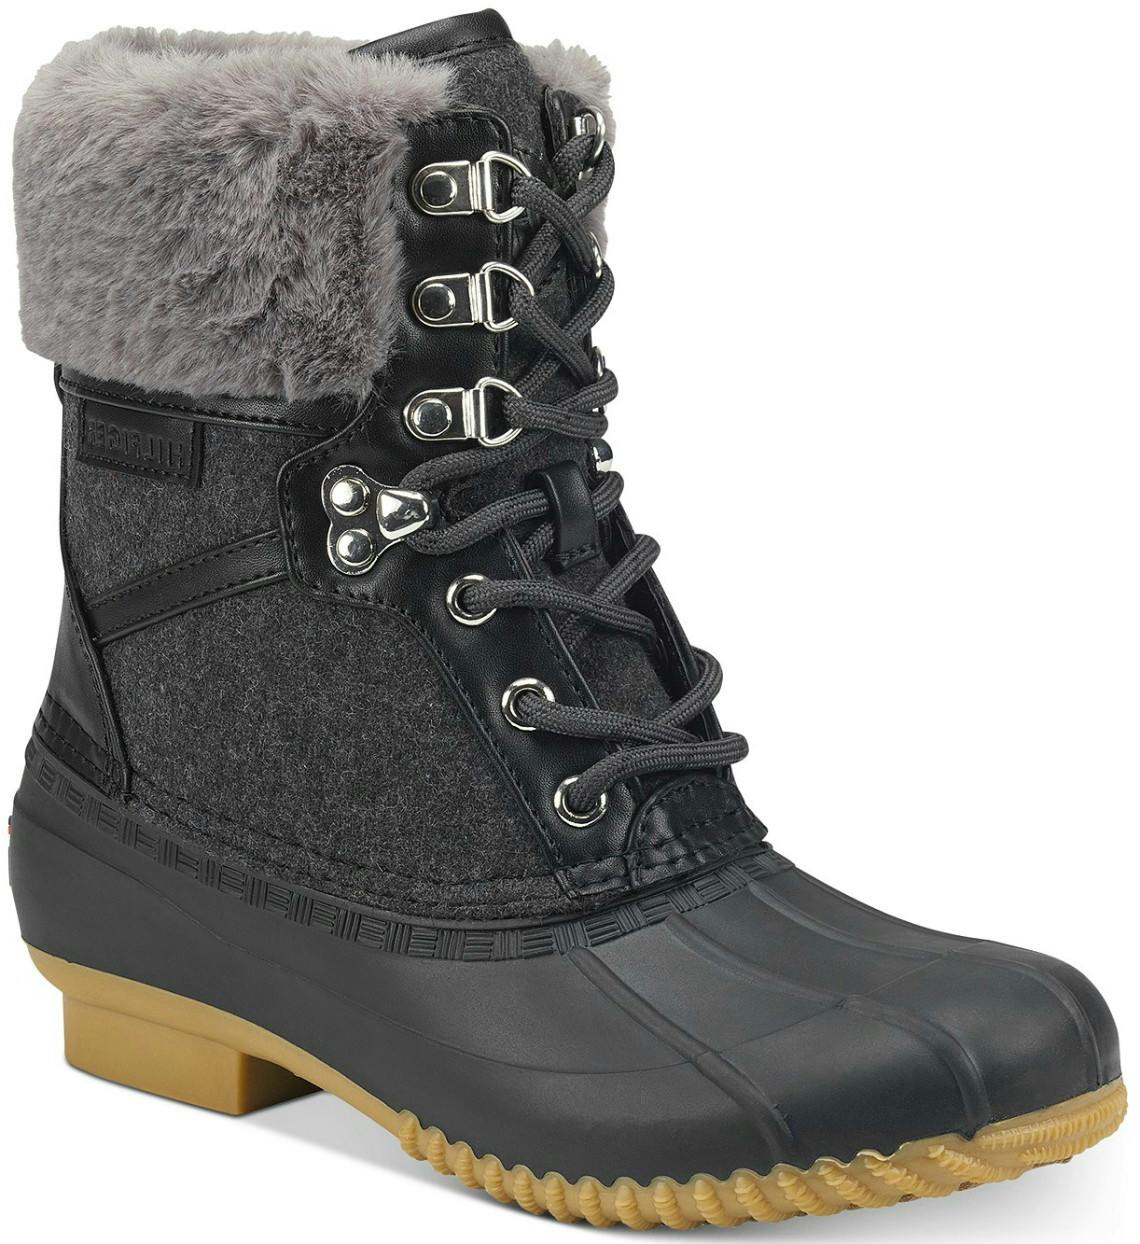 Flash Sale! 50% Off Designer Winter Boots at Macy&#39;s! - The Krazy Coupon Lady